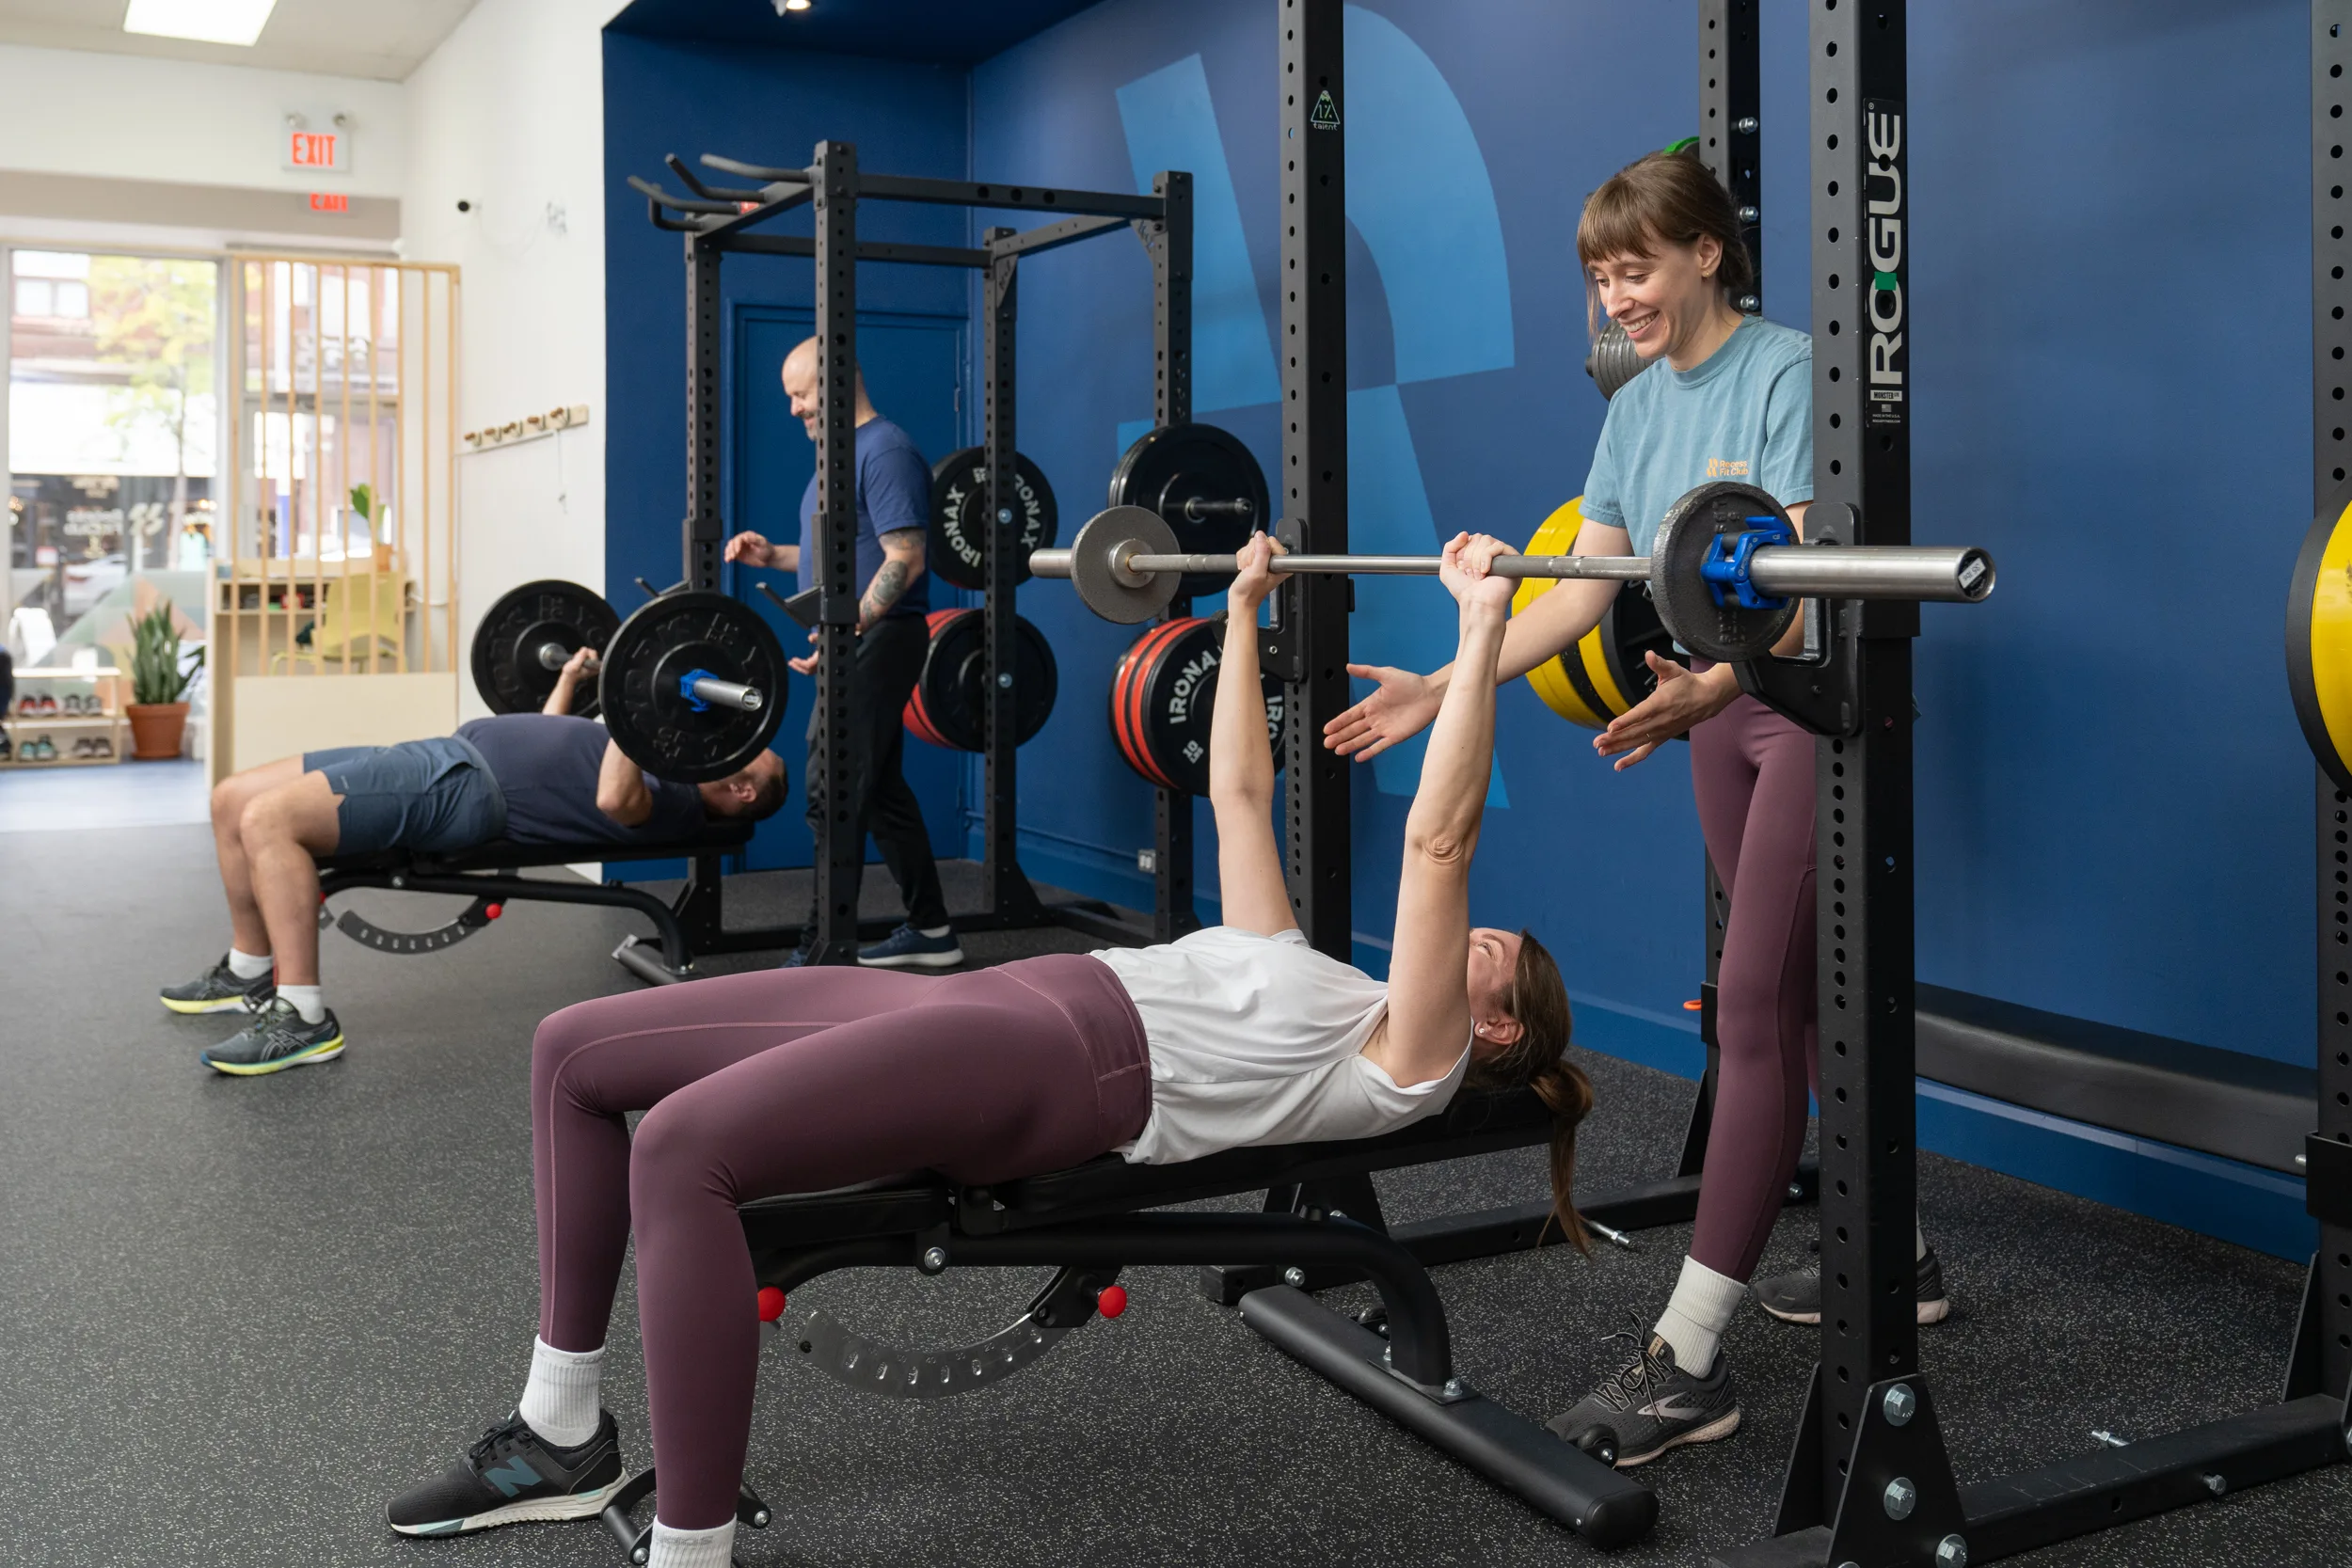 Two people in the gym doing a barbell exercise with two personal trainers.